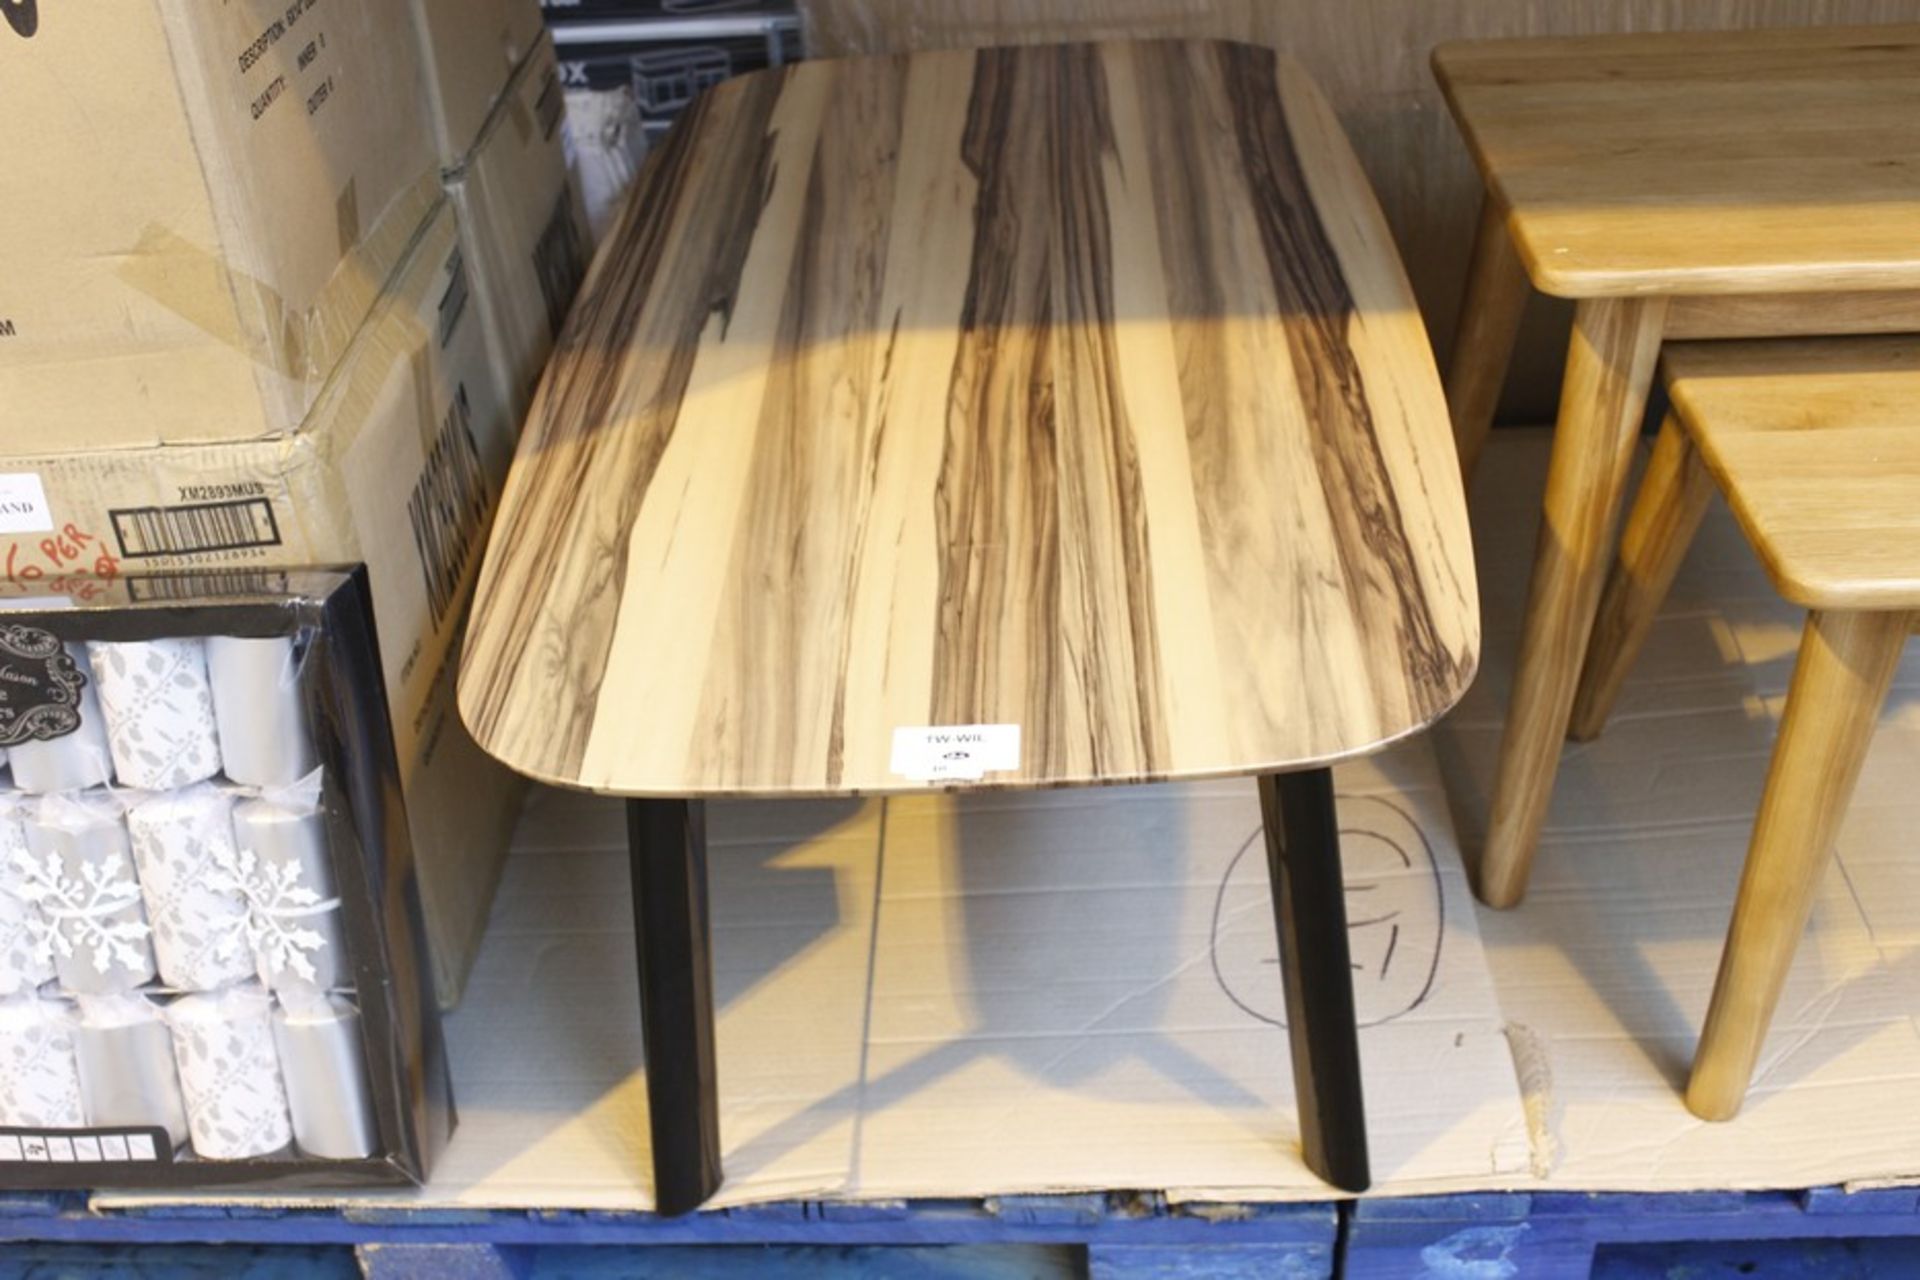 1 x WALNUT RECTANGULAR COFFEE TABLE RRP £350  *PLEASE NOTE THAT THE BID PRICE IS MULTIPLIED BY THE